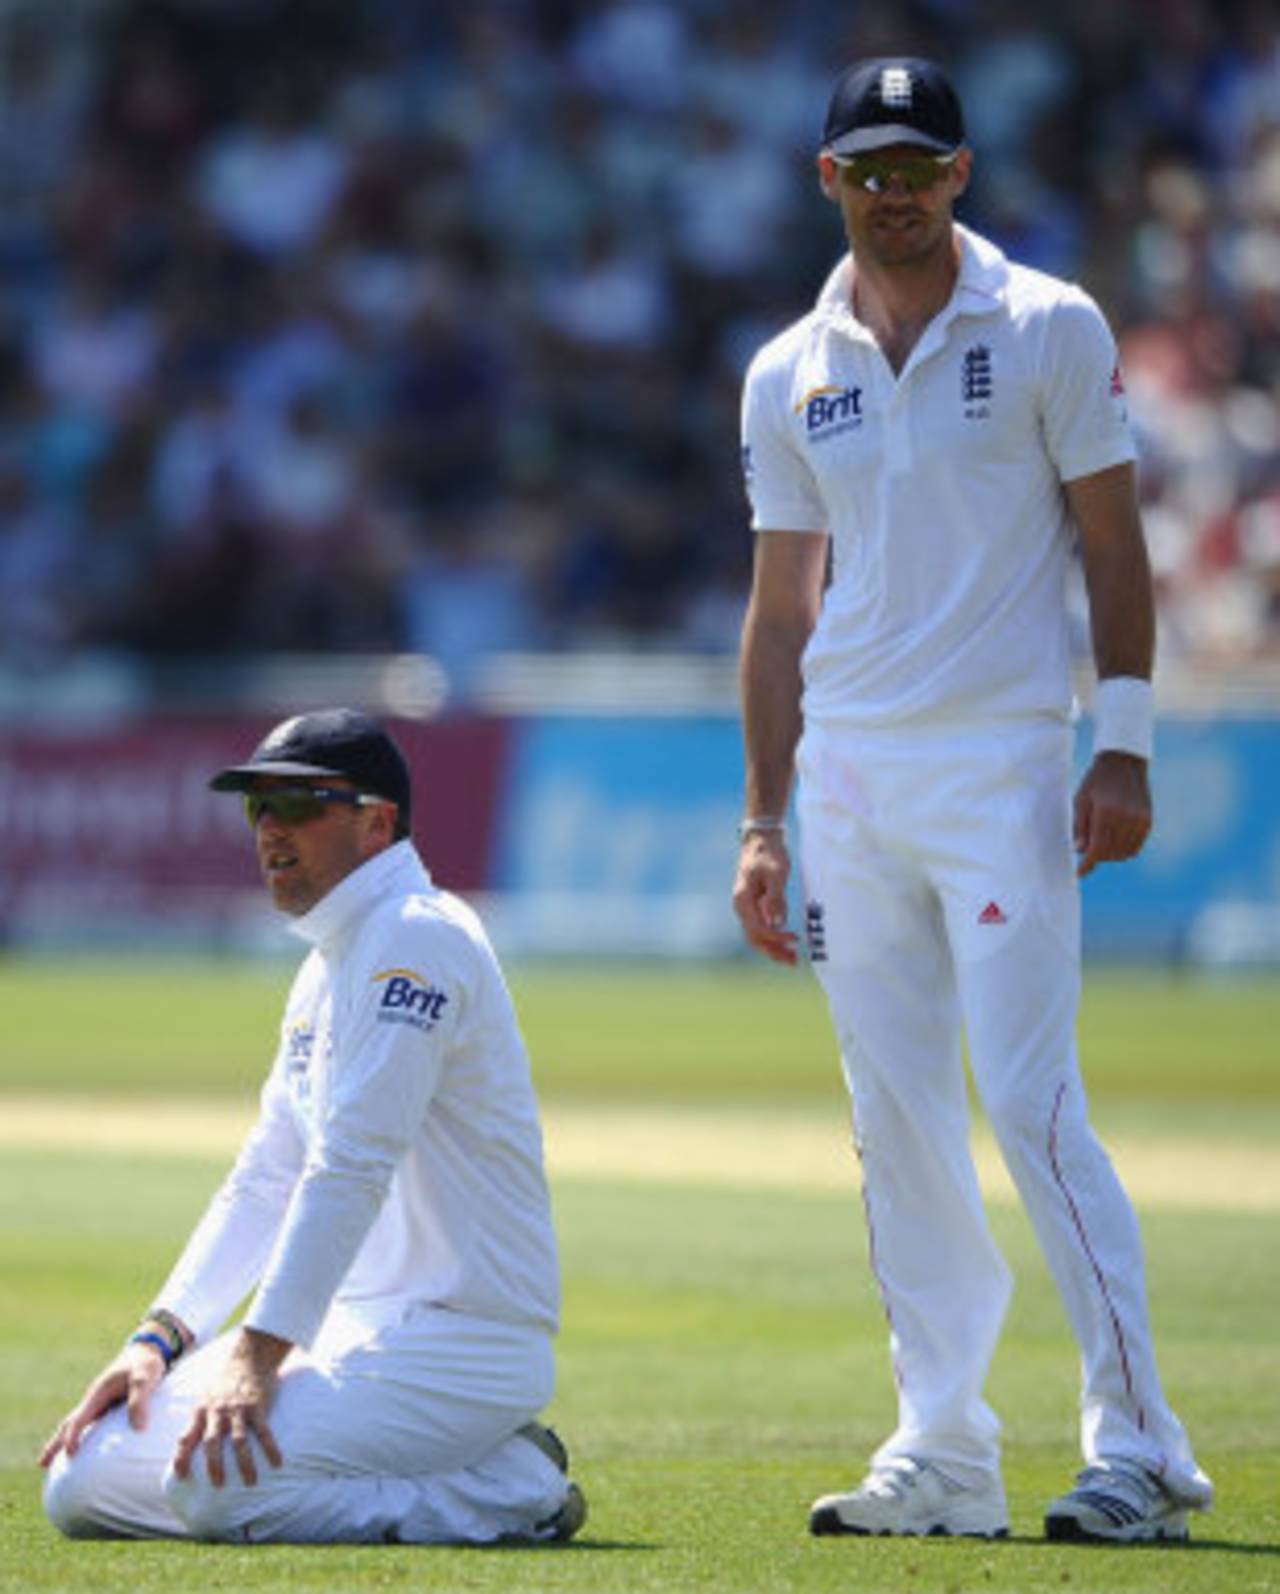 Graeme Swann did not pull any punches in describing England's first Test defeat&nbsp;&nbsp;&bull;&nbsp;&nbsp;Getty Images